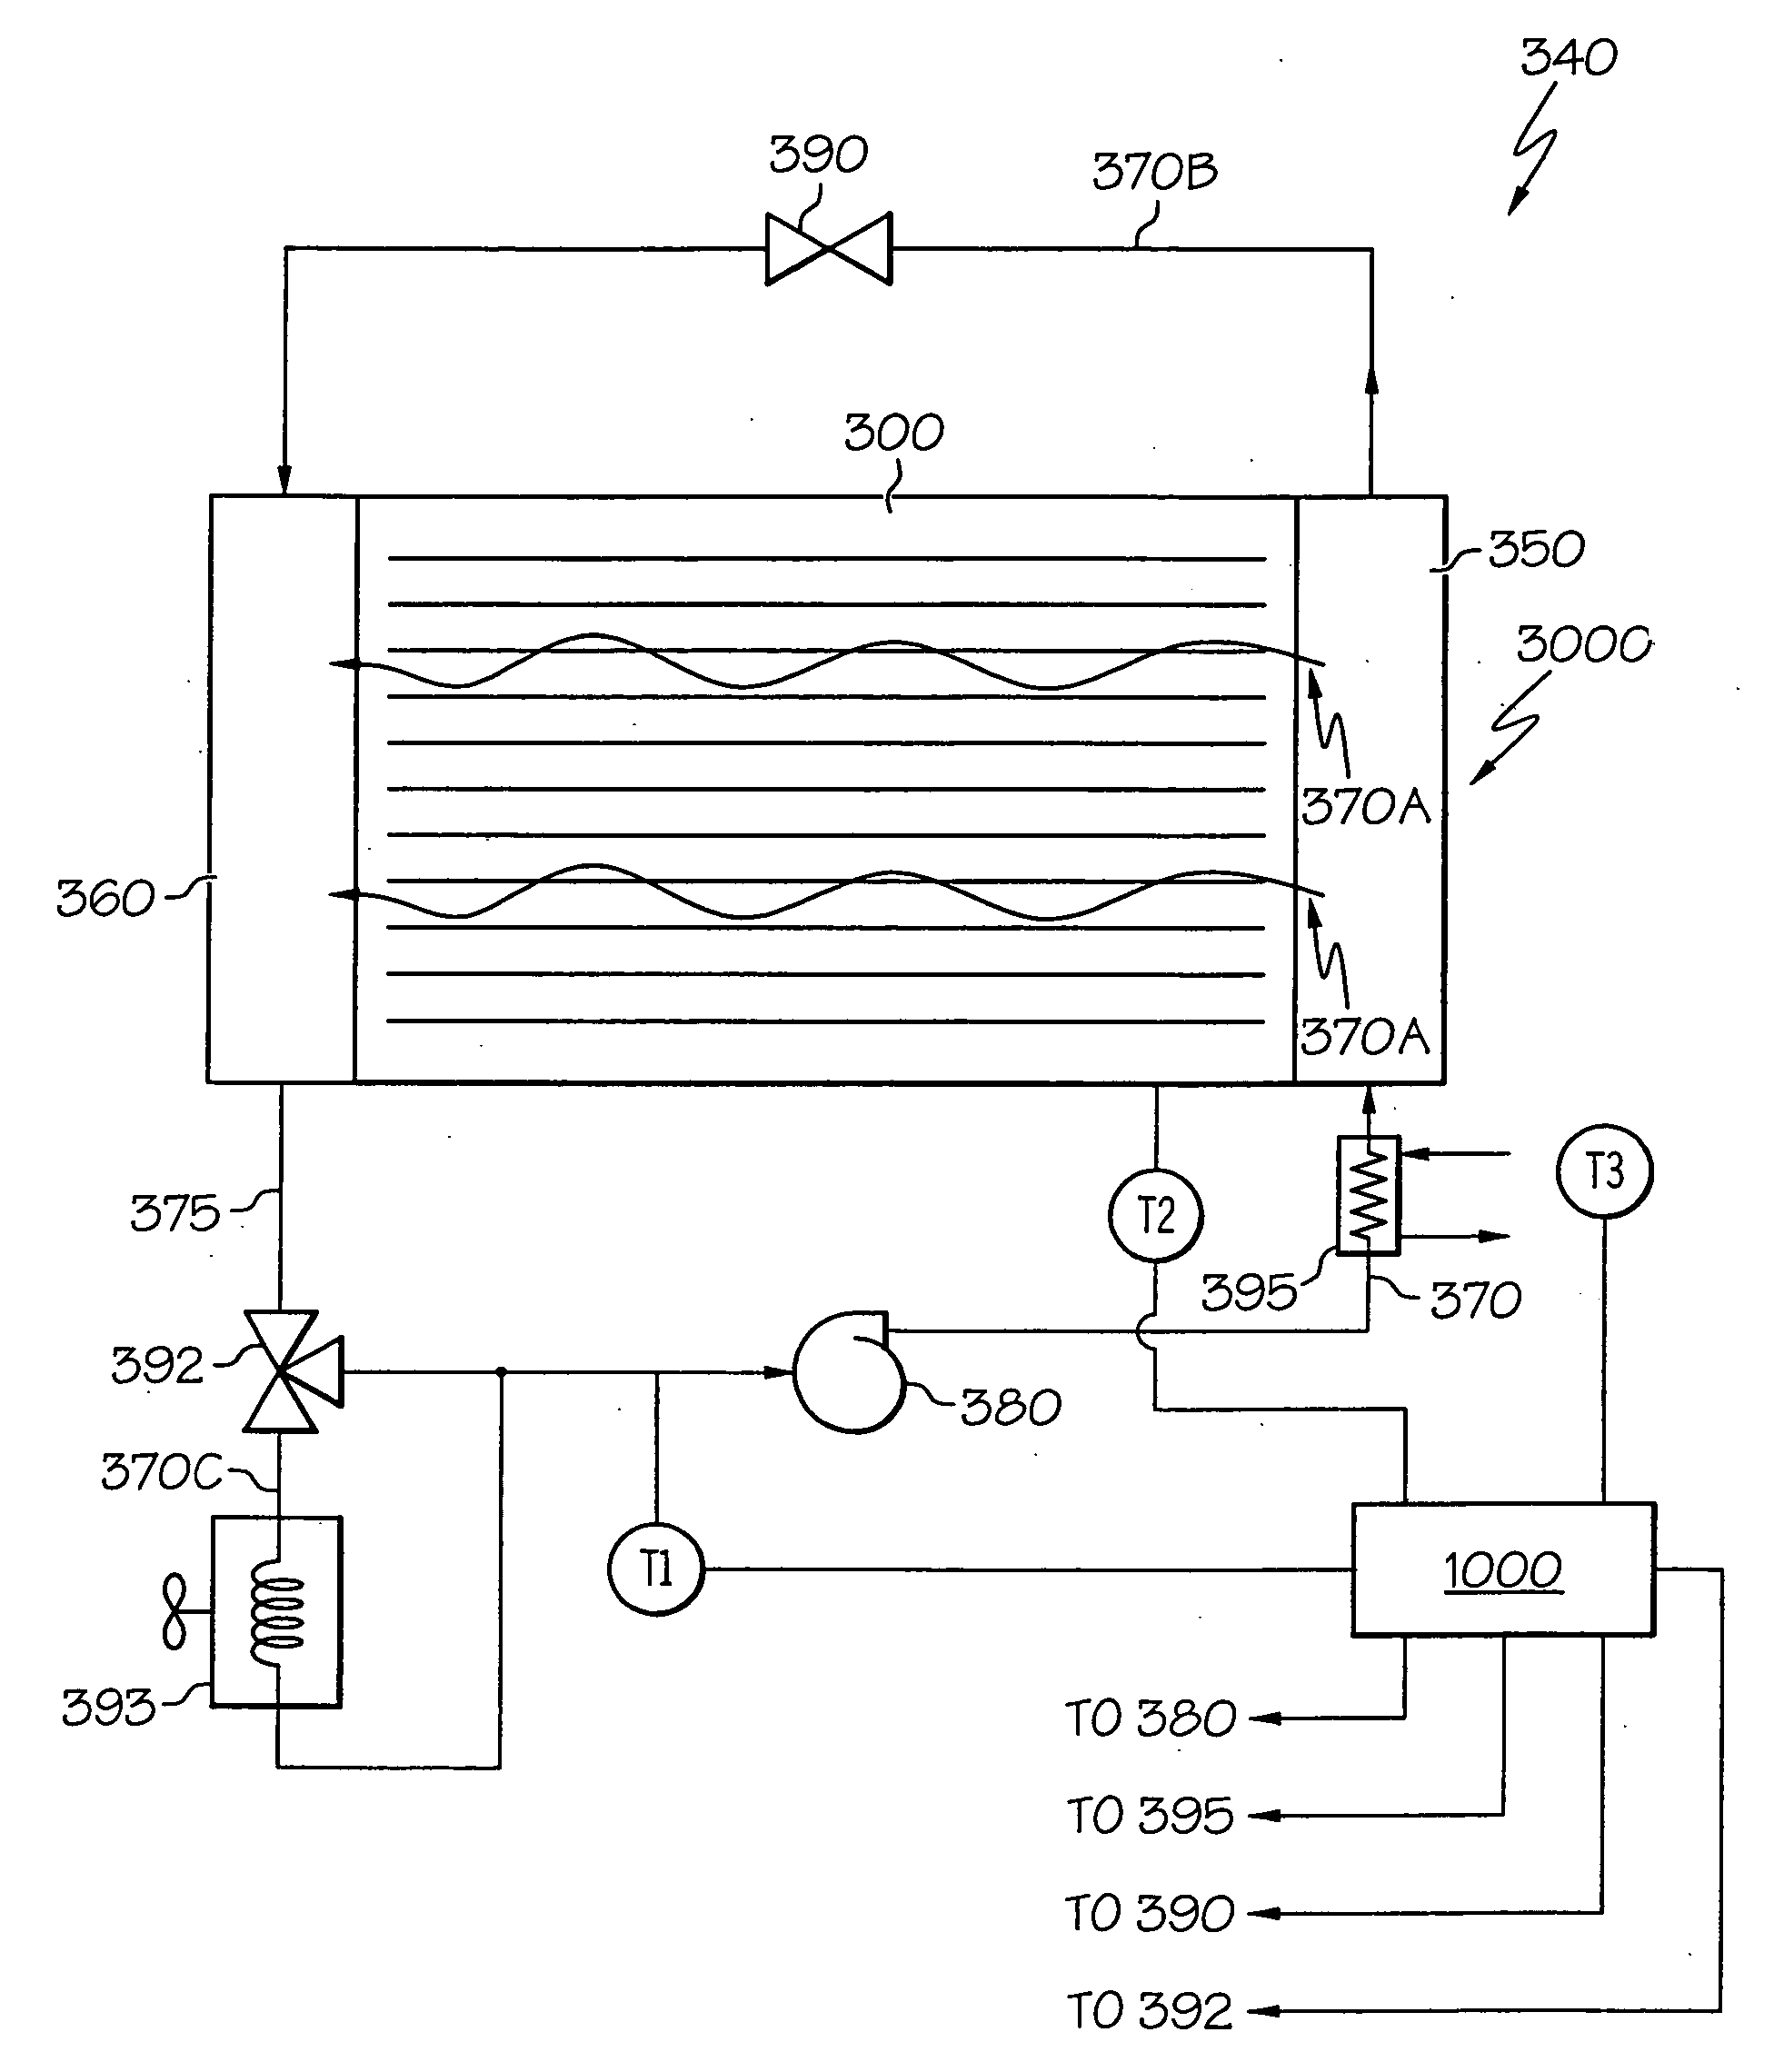 Coolant bypass for fuel cell stack